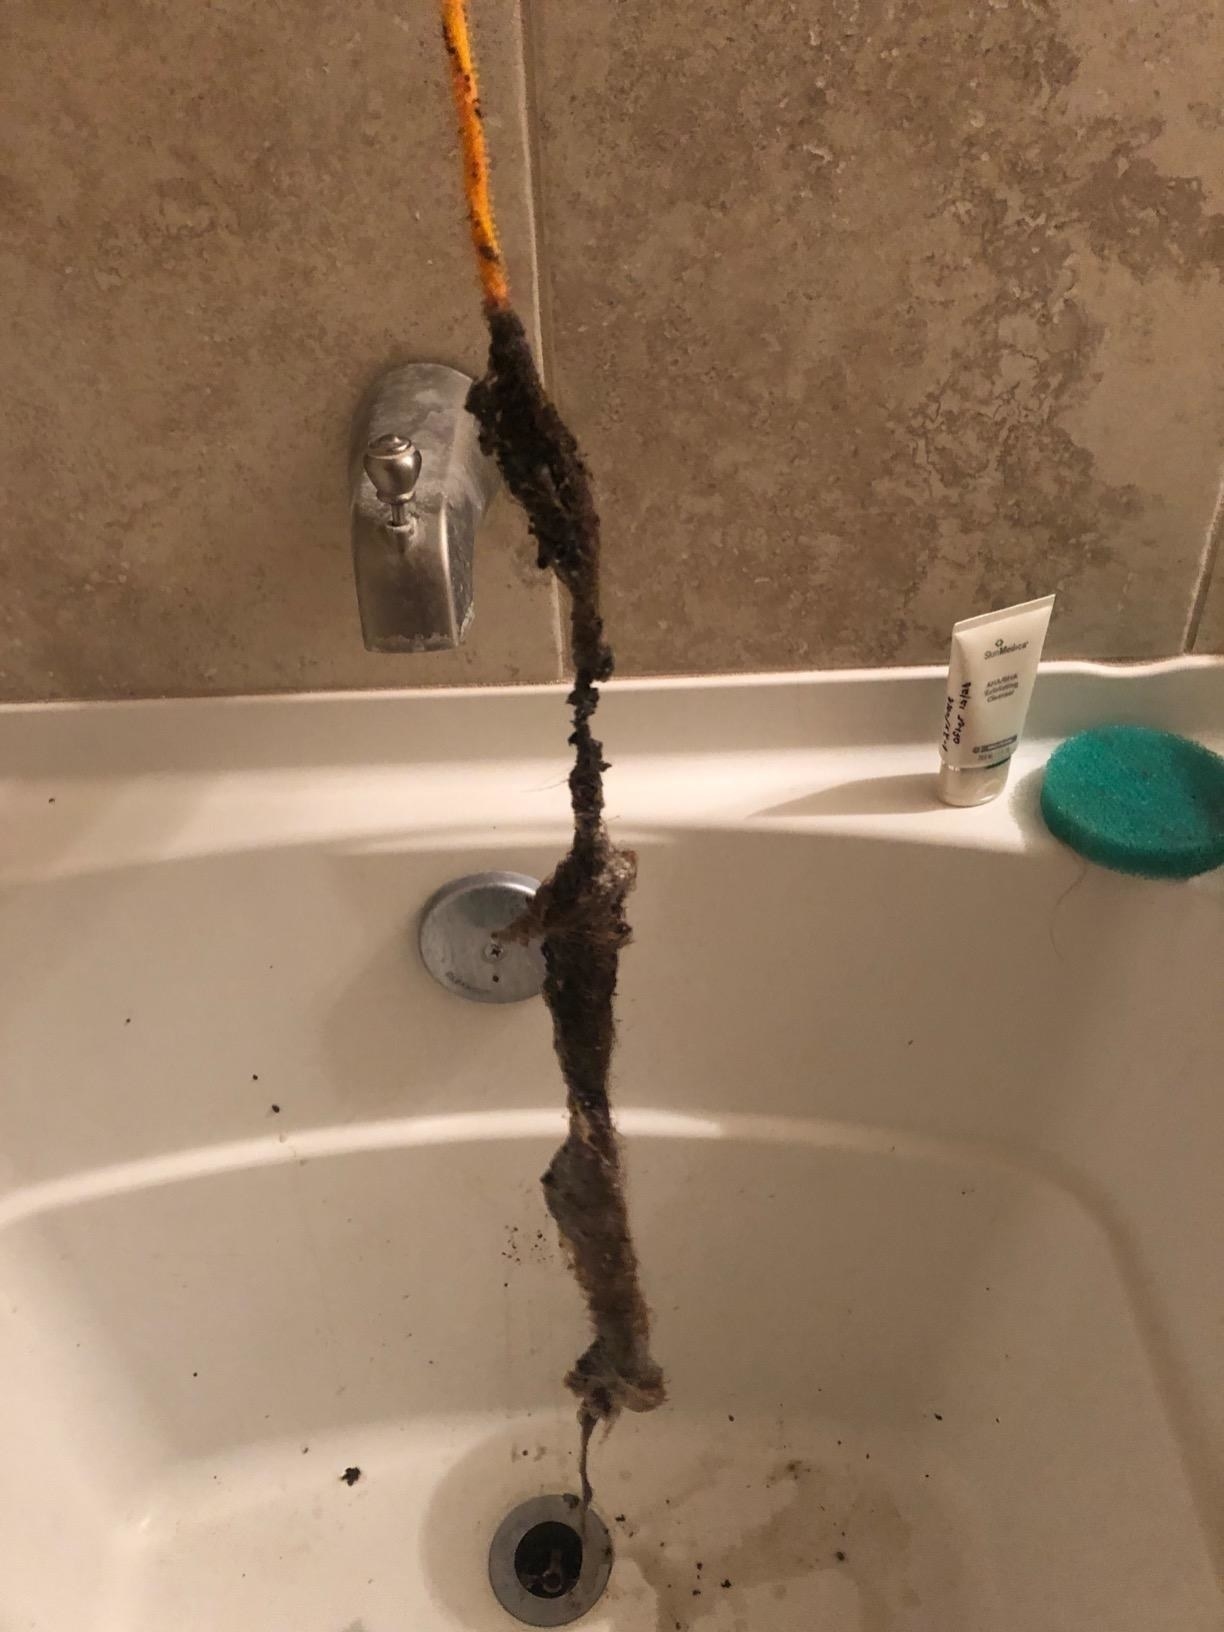 This thing growing in my bathroom. Comes back after being plucked,  bleached. I'd like to get rid of it : r/whatisthisthing